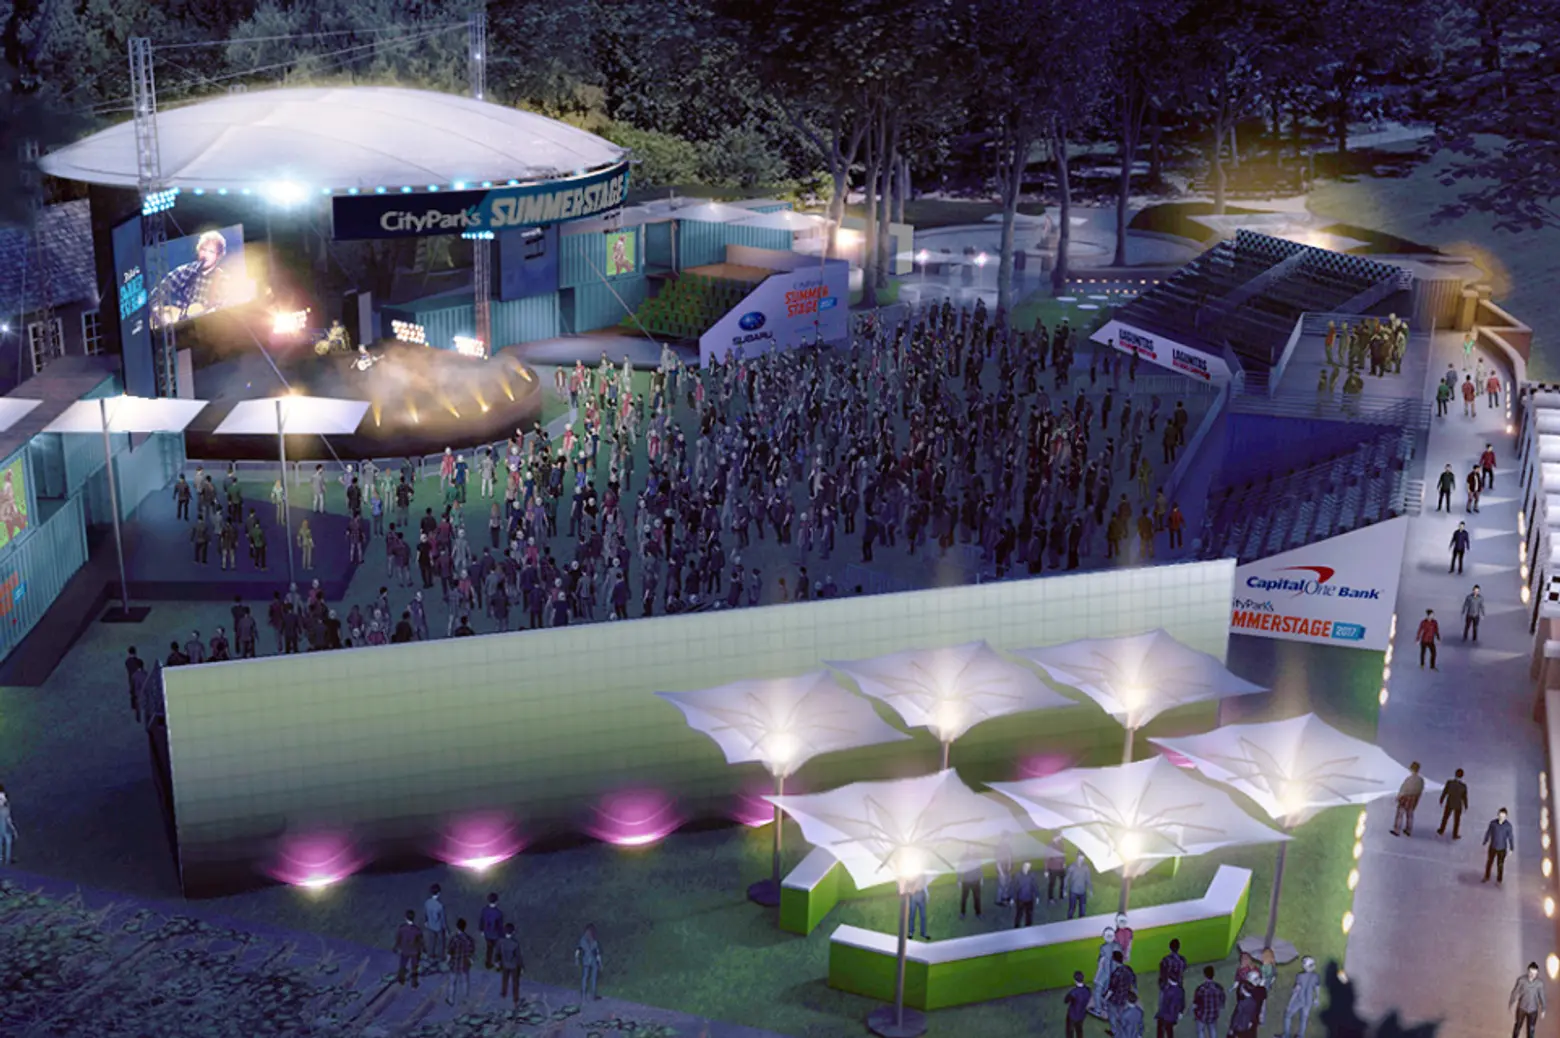 SummerStage in Central Park will get a revamp and new stage for the 2019 season